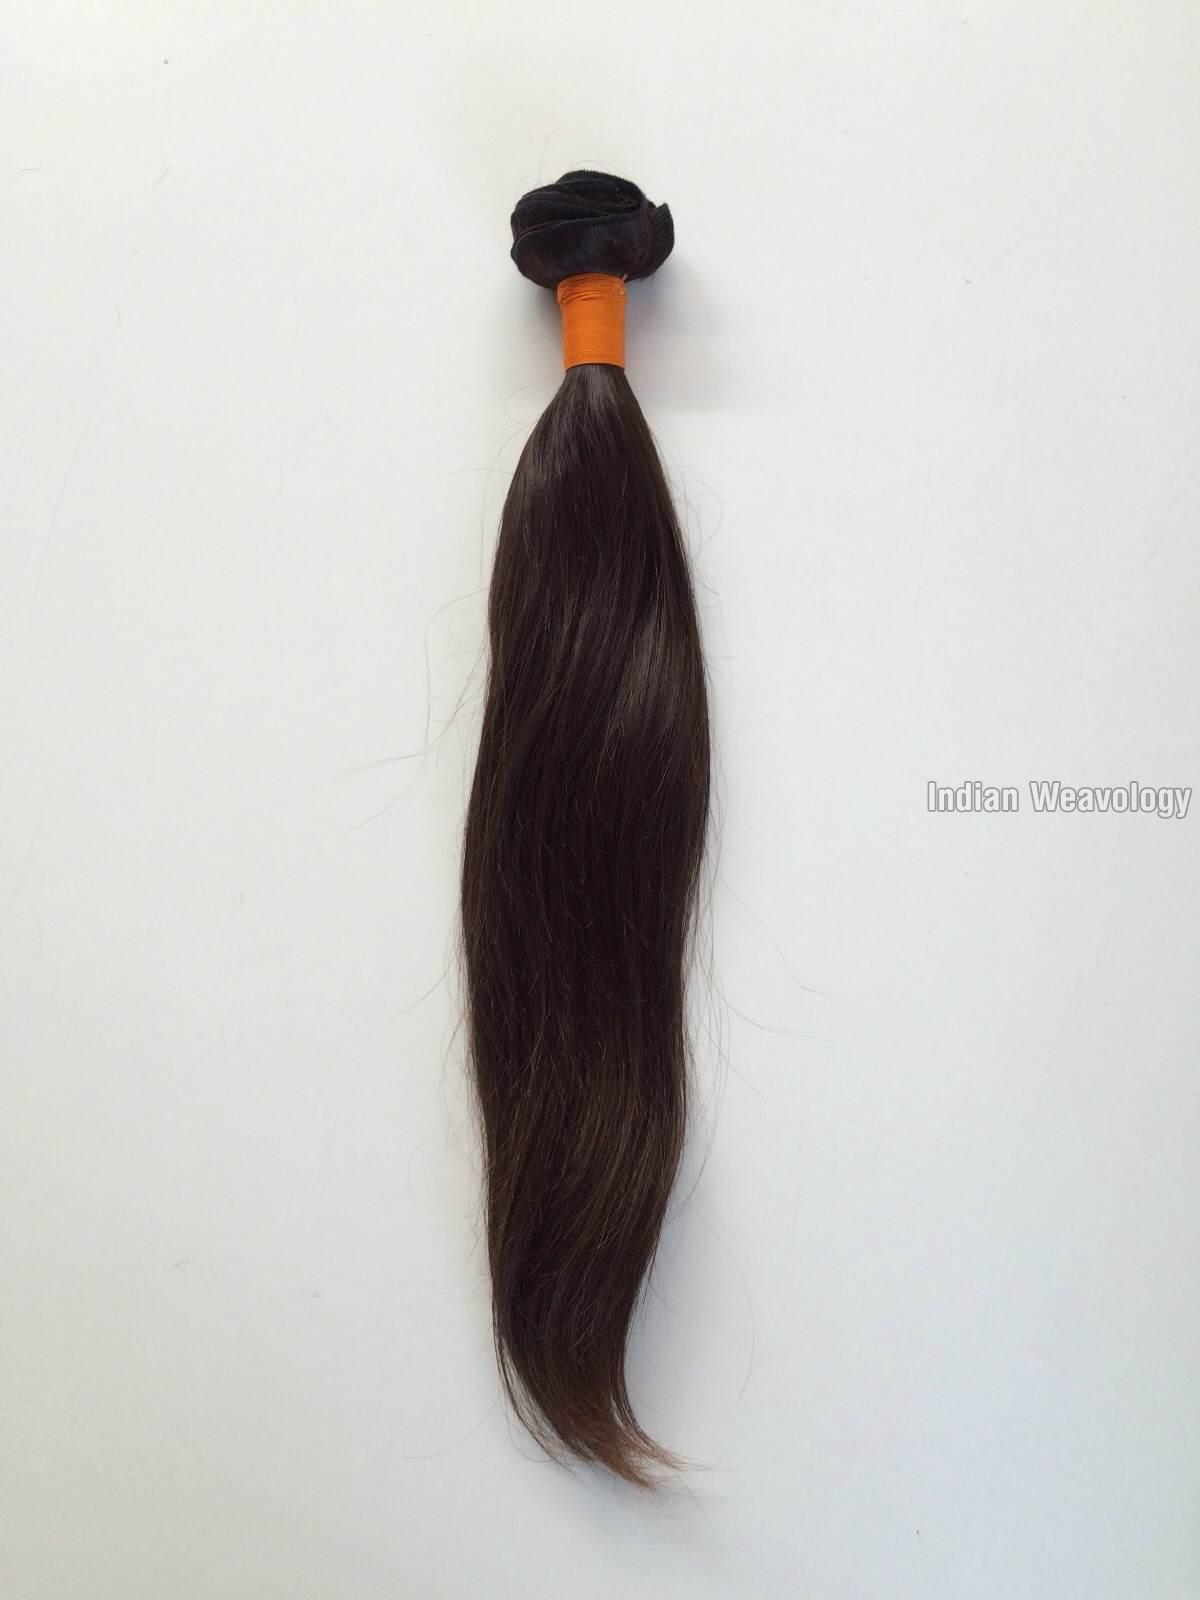 Weft Hair Extension, for Parlour, Personal